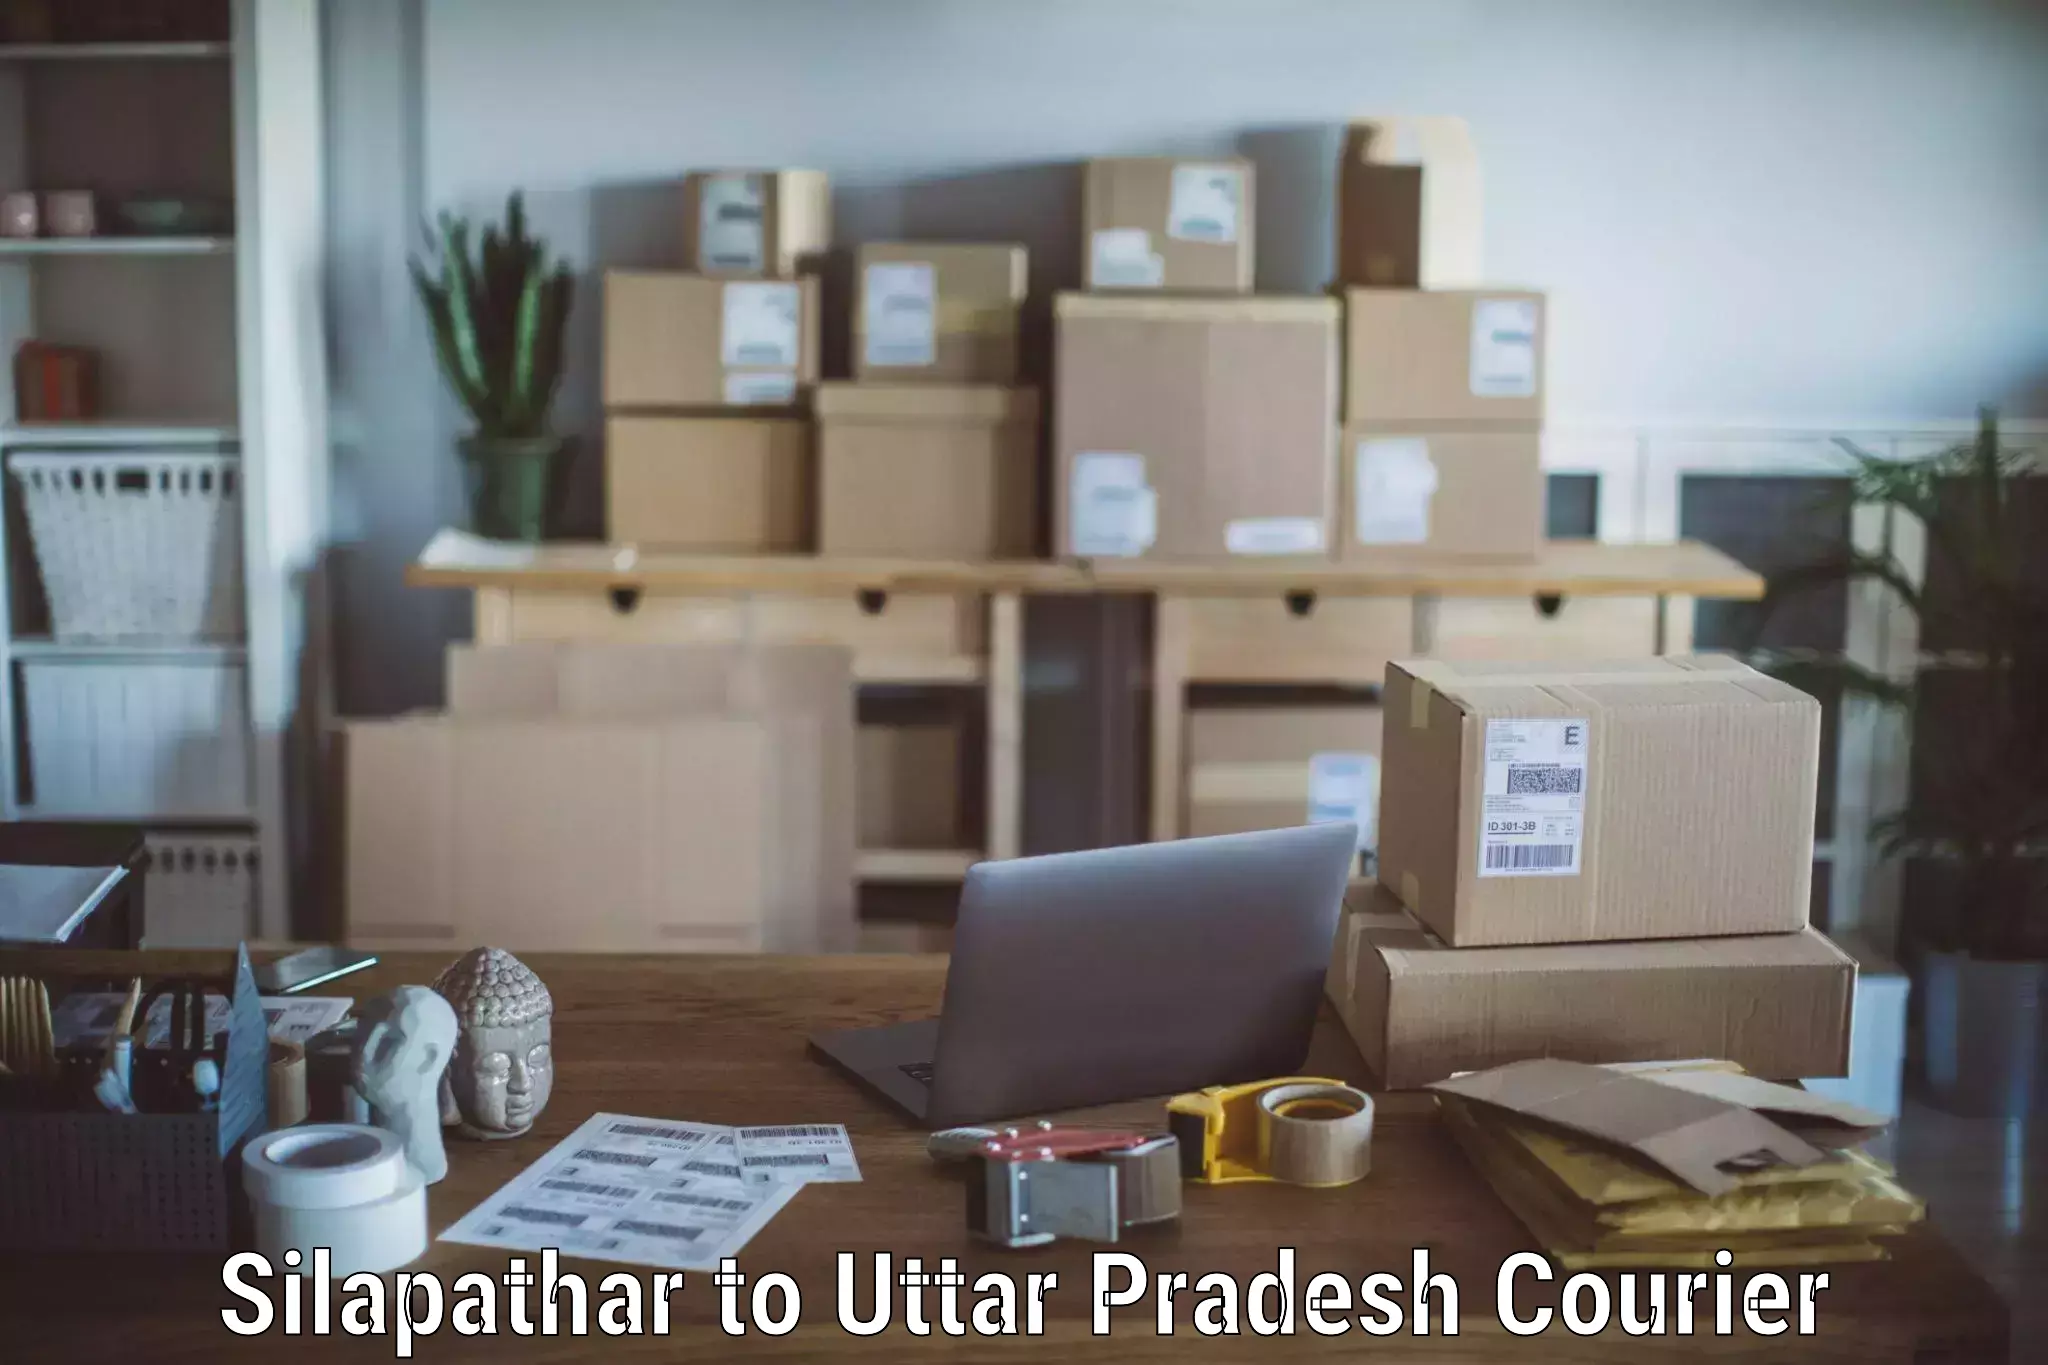 Furniture transport specialists Silapathar to Pihani